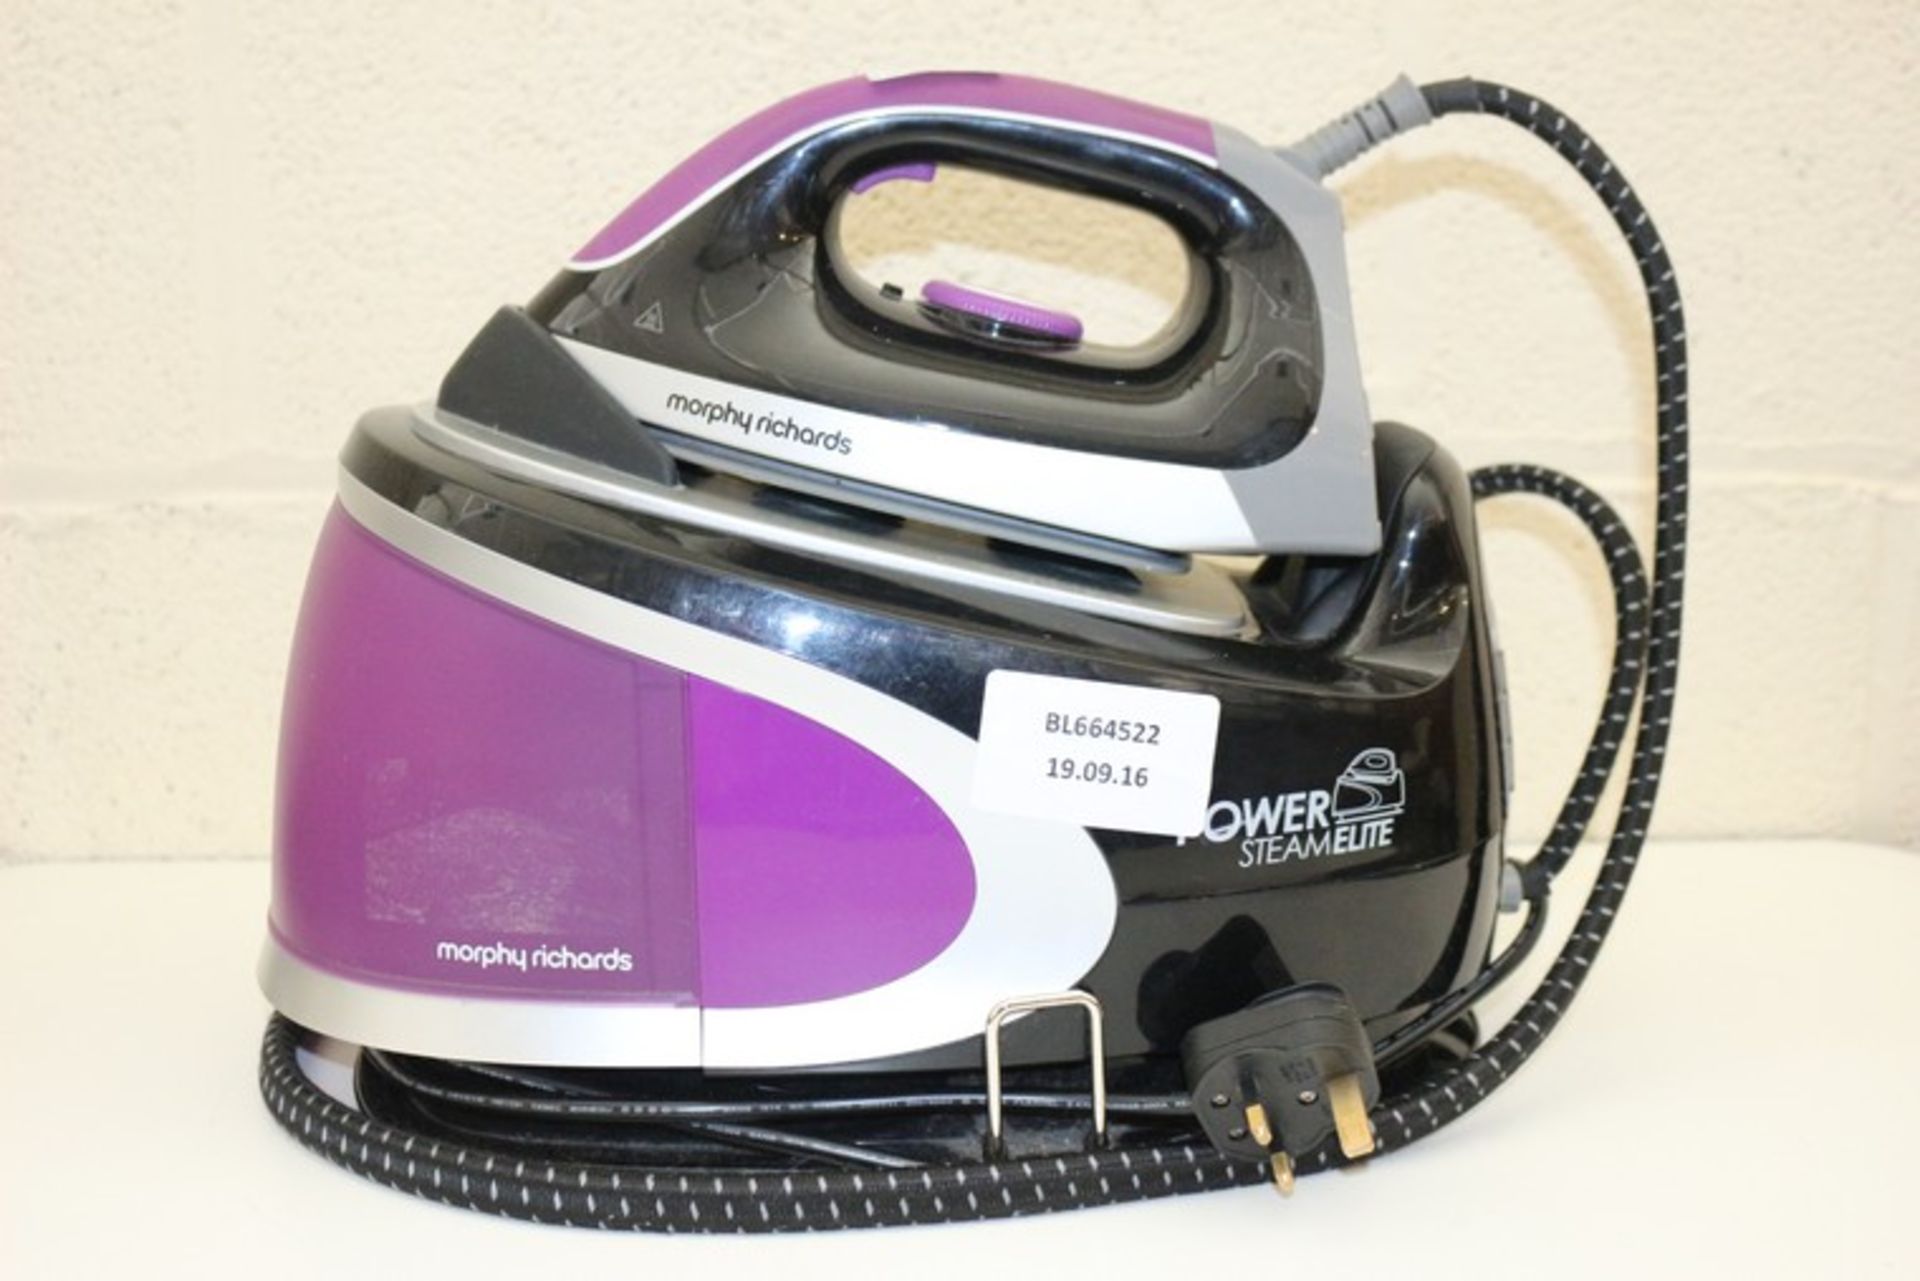 1 x MORPHY RICHARDS POWER STEAM ELITE STEAM GENERATING IRON RRP £140 *PLEASE NOTE THAT THE BID PRICE